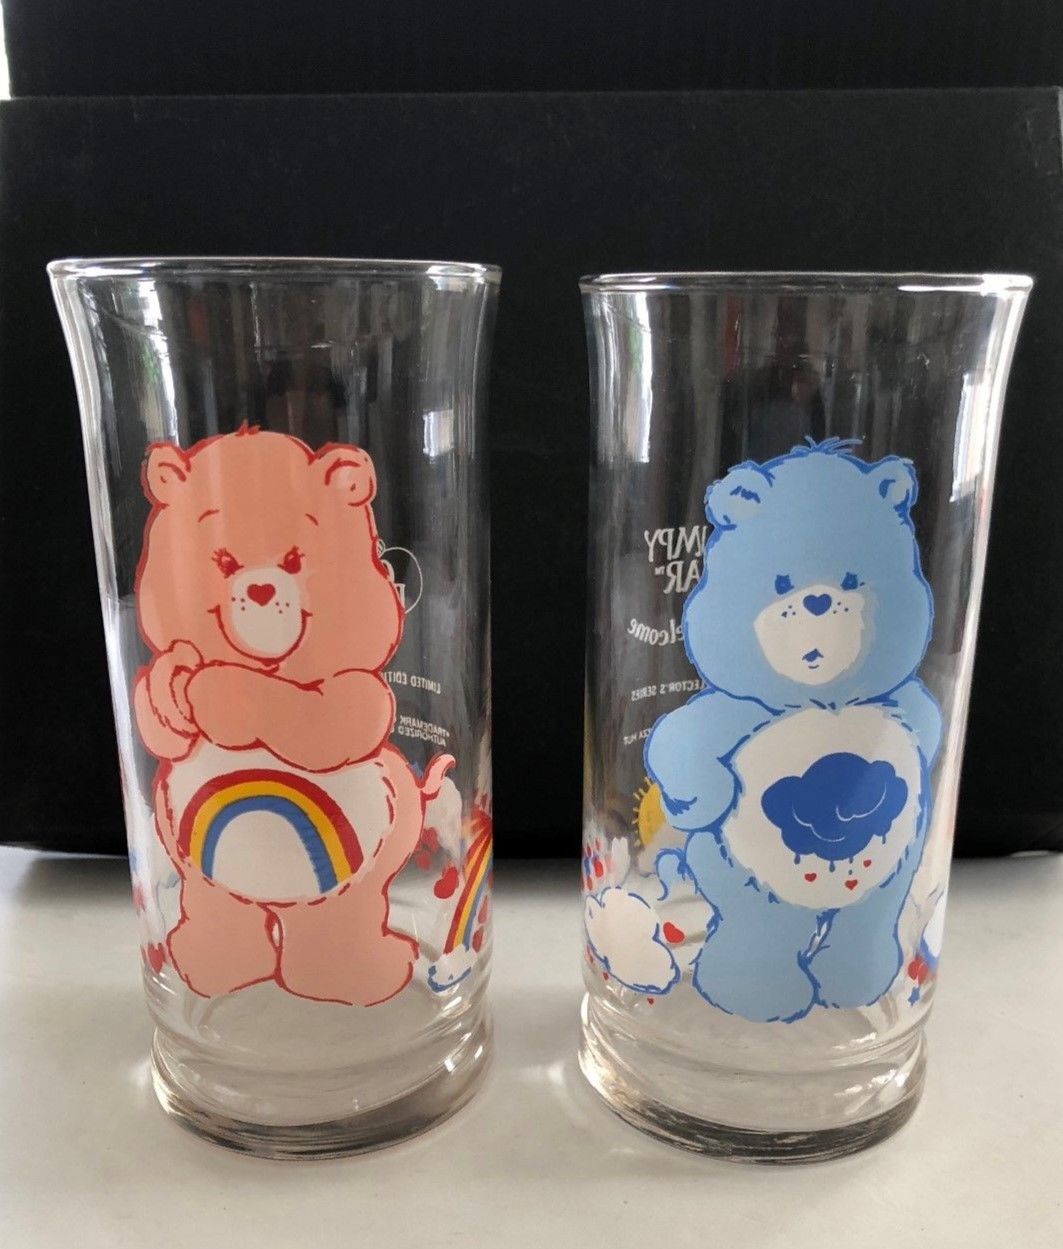 Care Bear Glasses Tumblers 1983 Libby Glass Co Pizza Hut Cheer & Grumpy-Set of 2